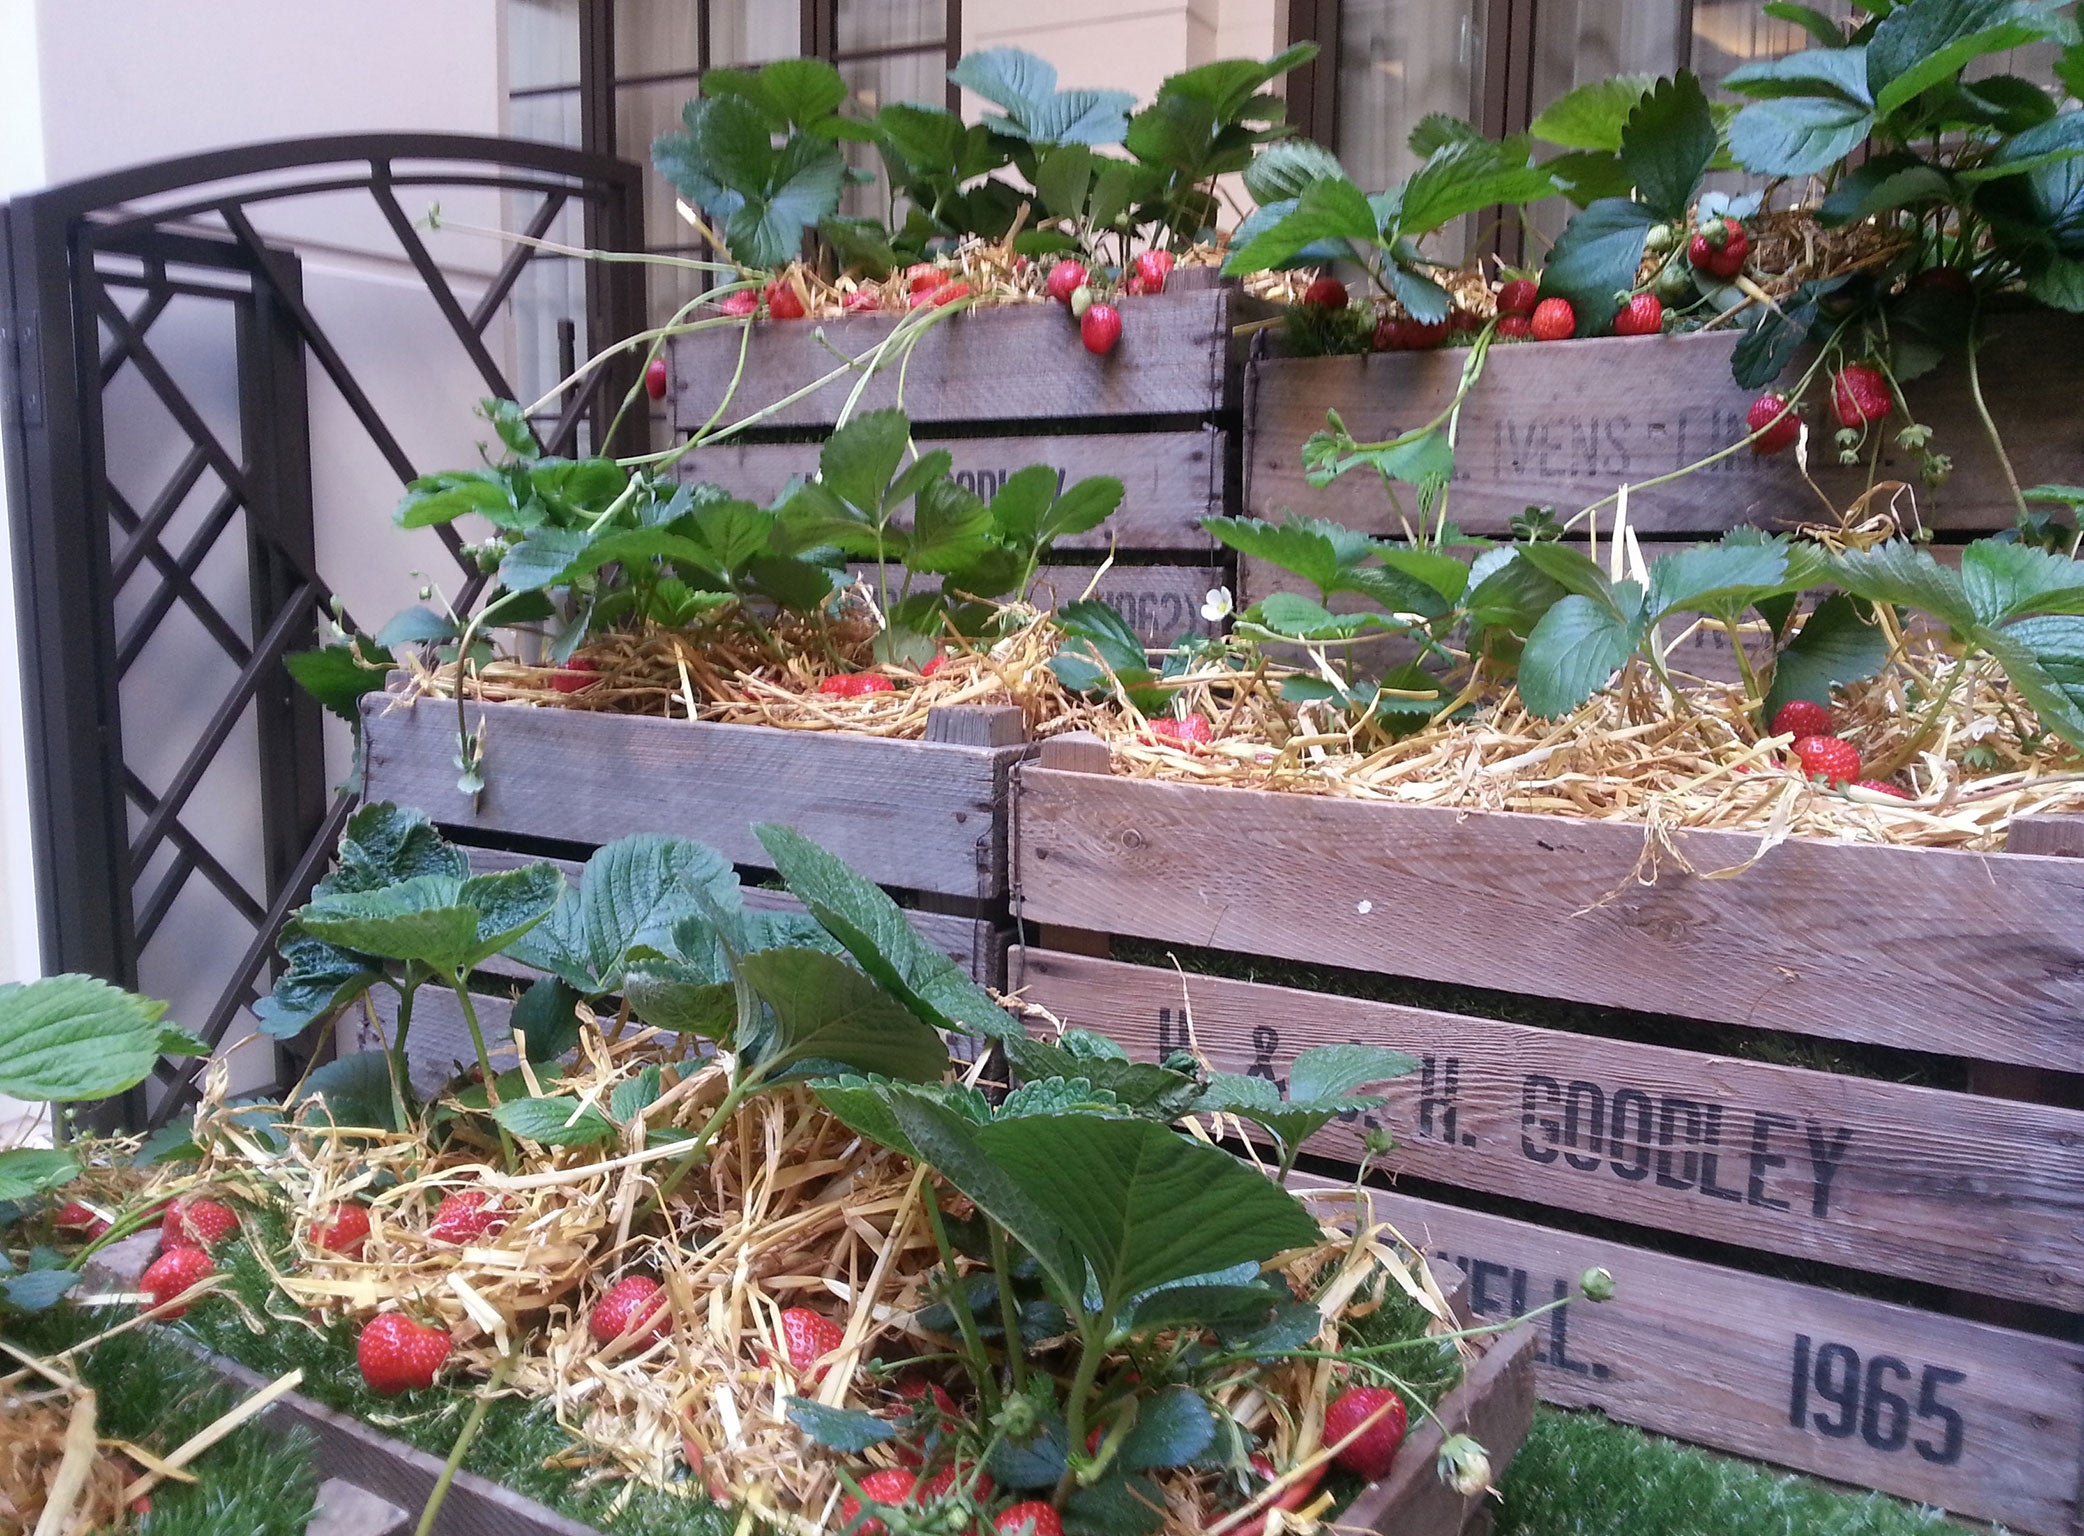 Strawberry fields: growing fruit and vegetables on the roof